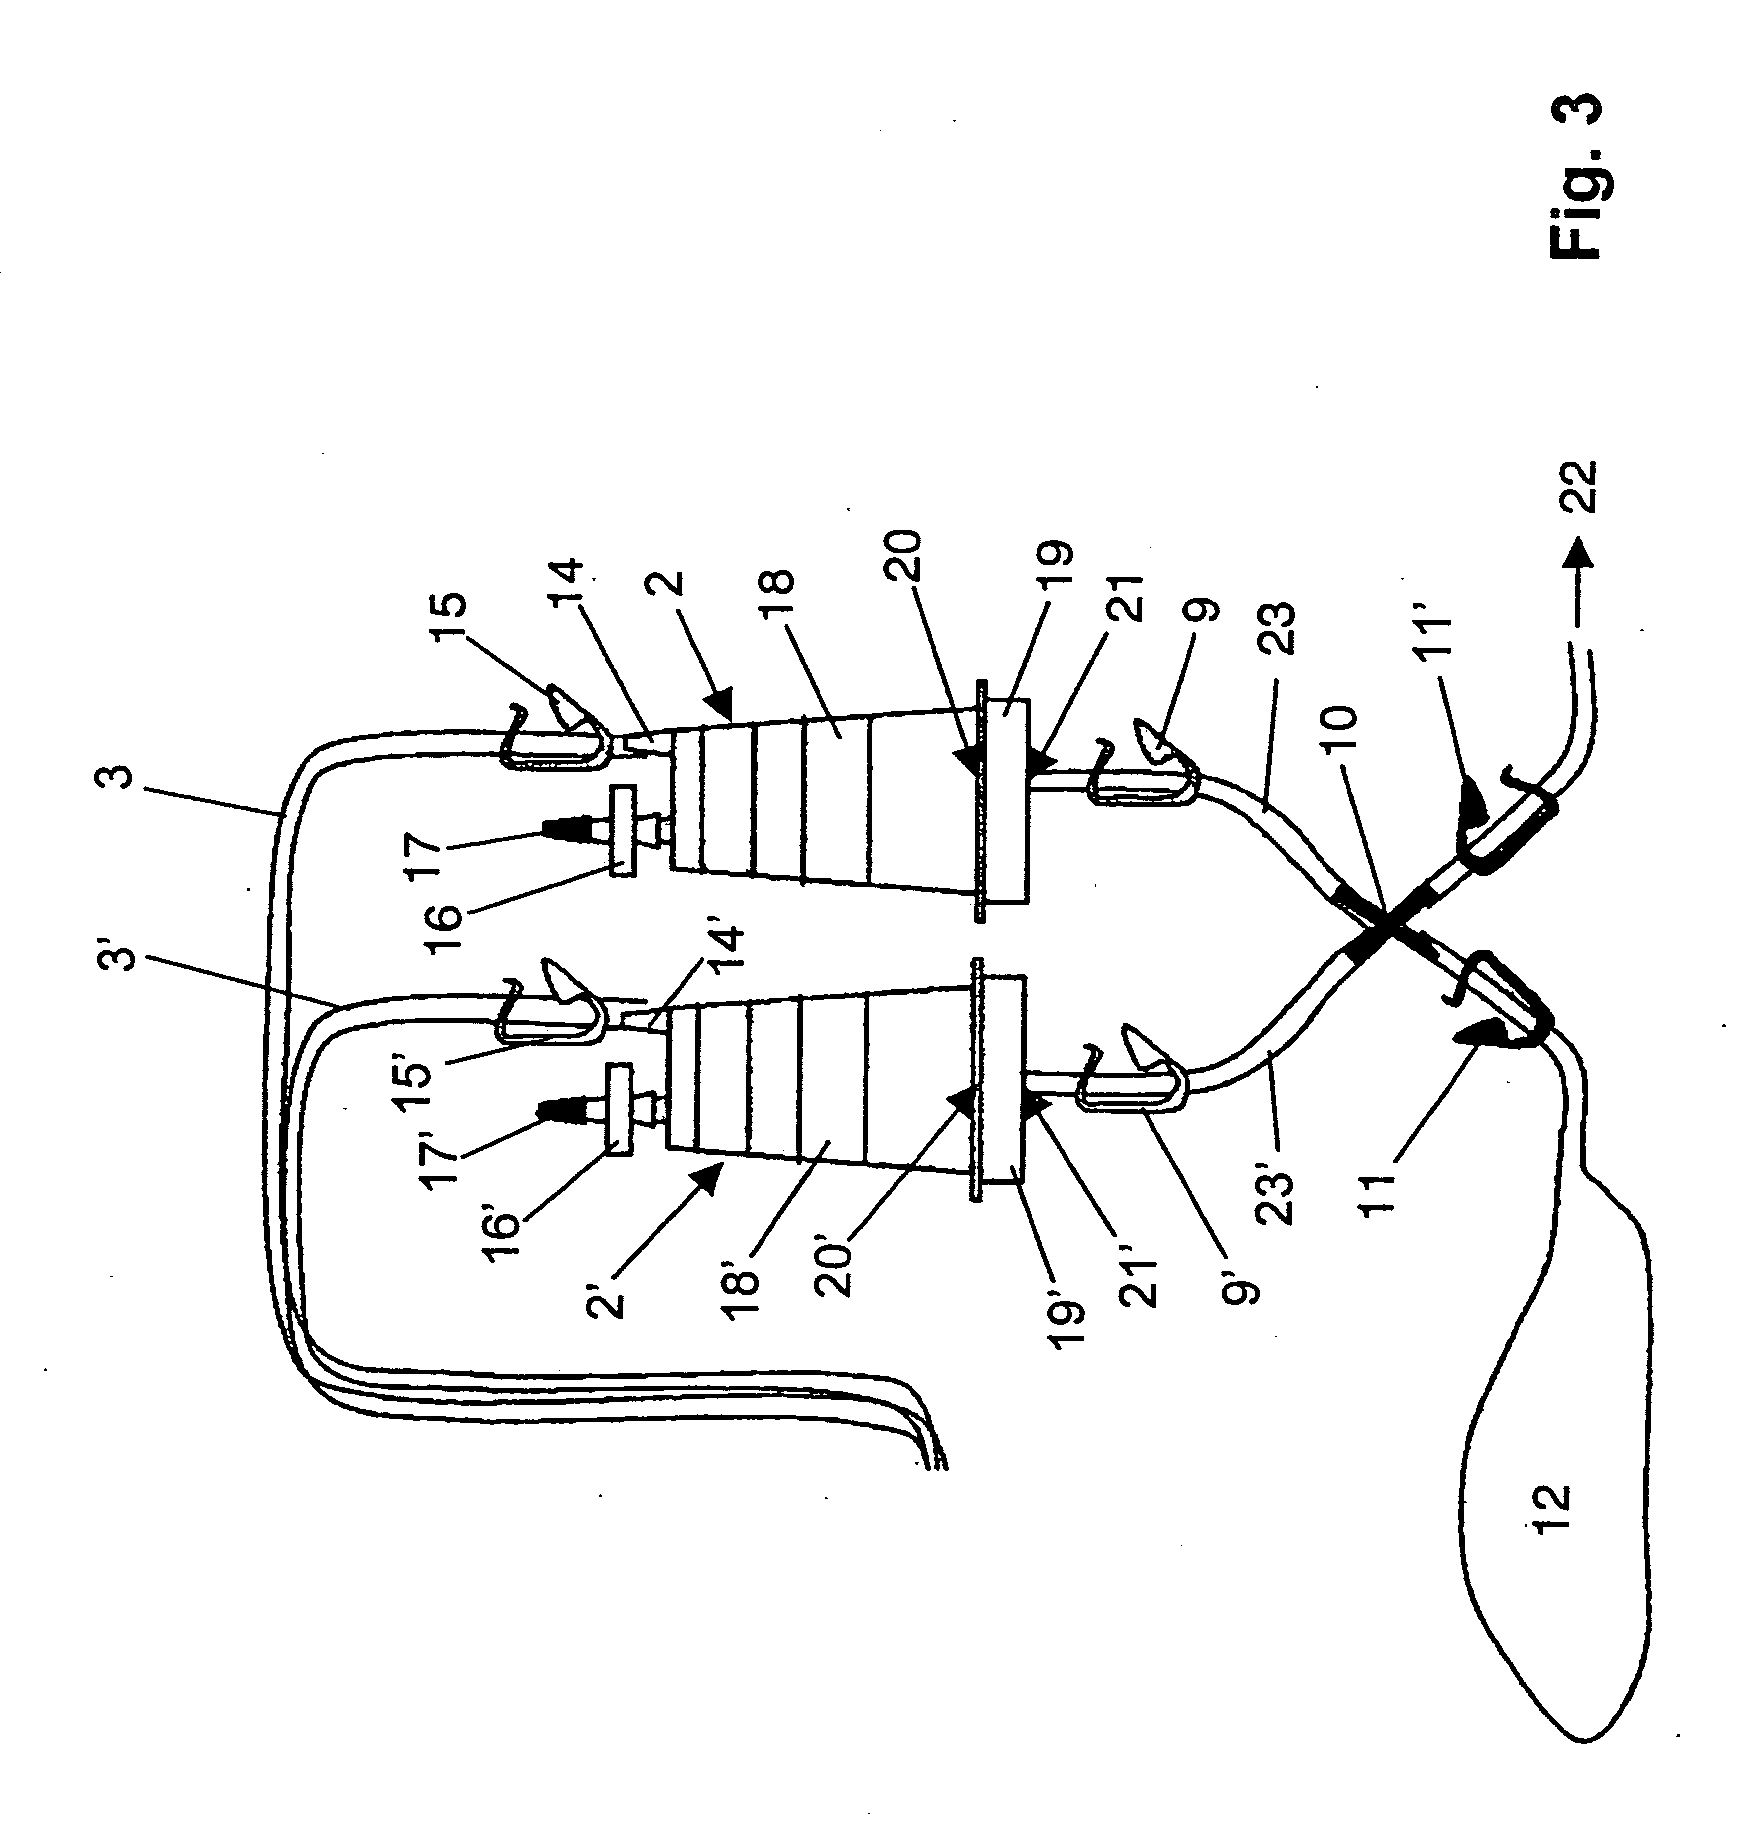 Device and method for sterility testing